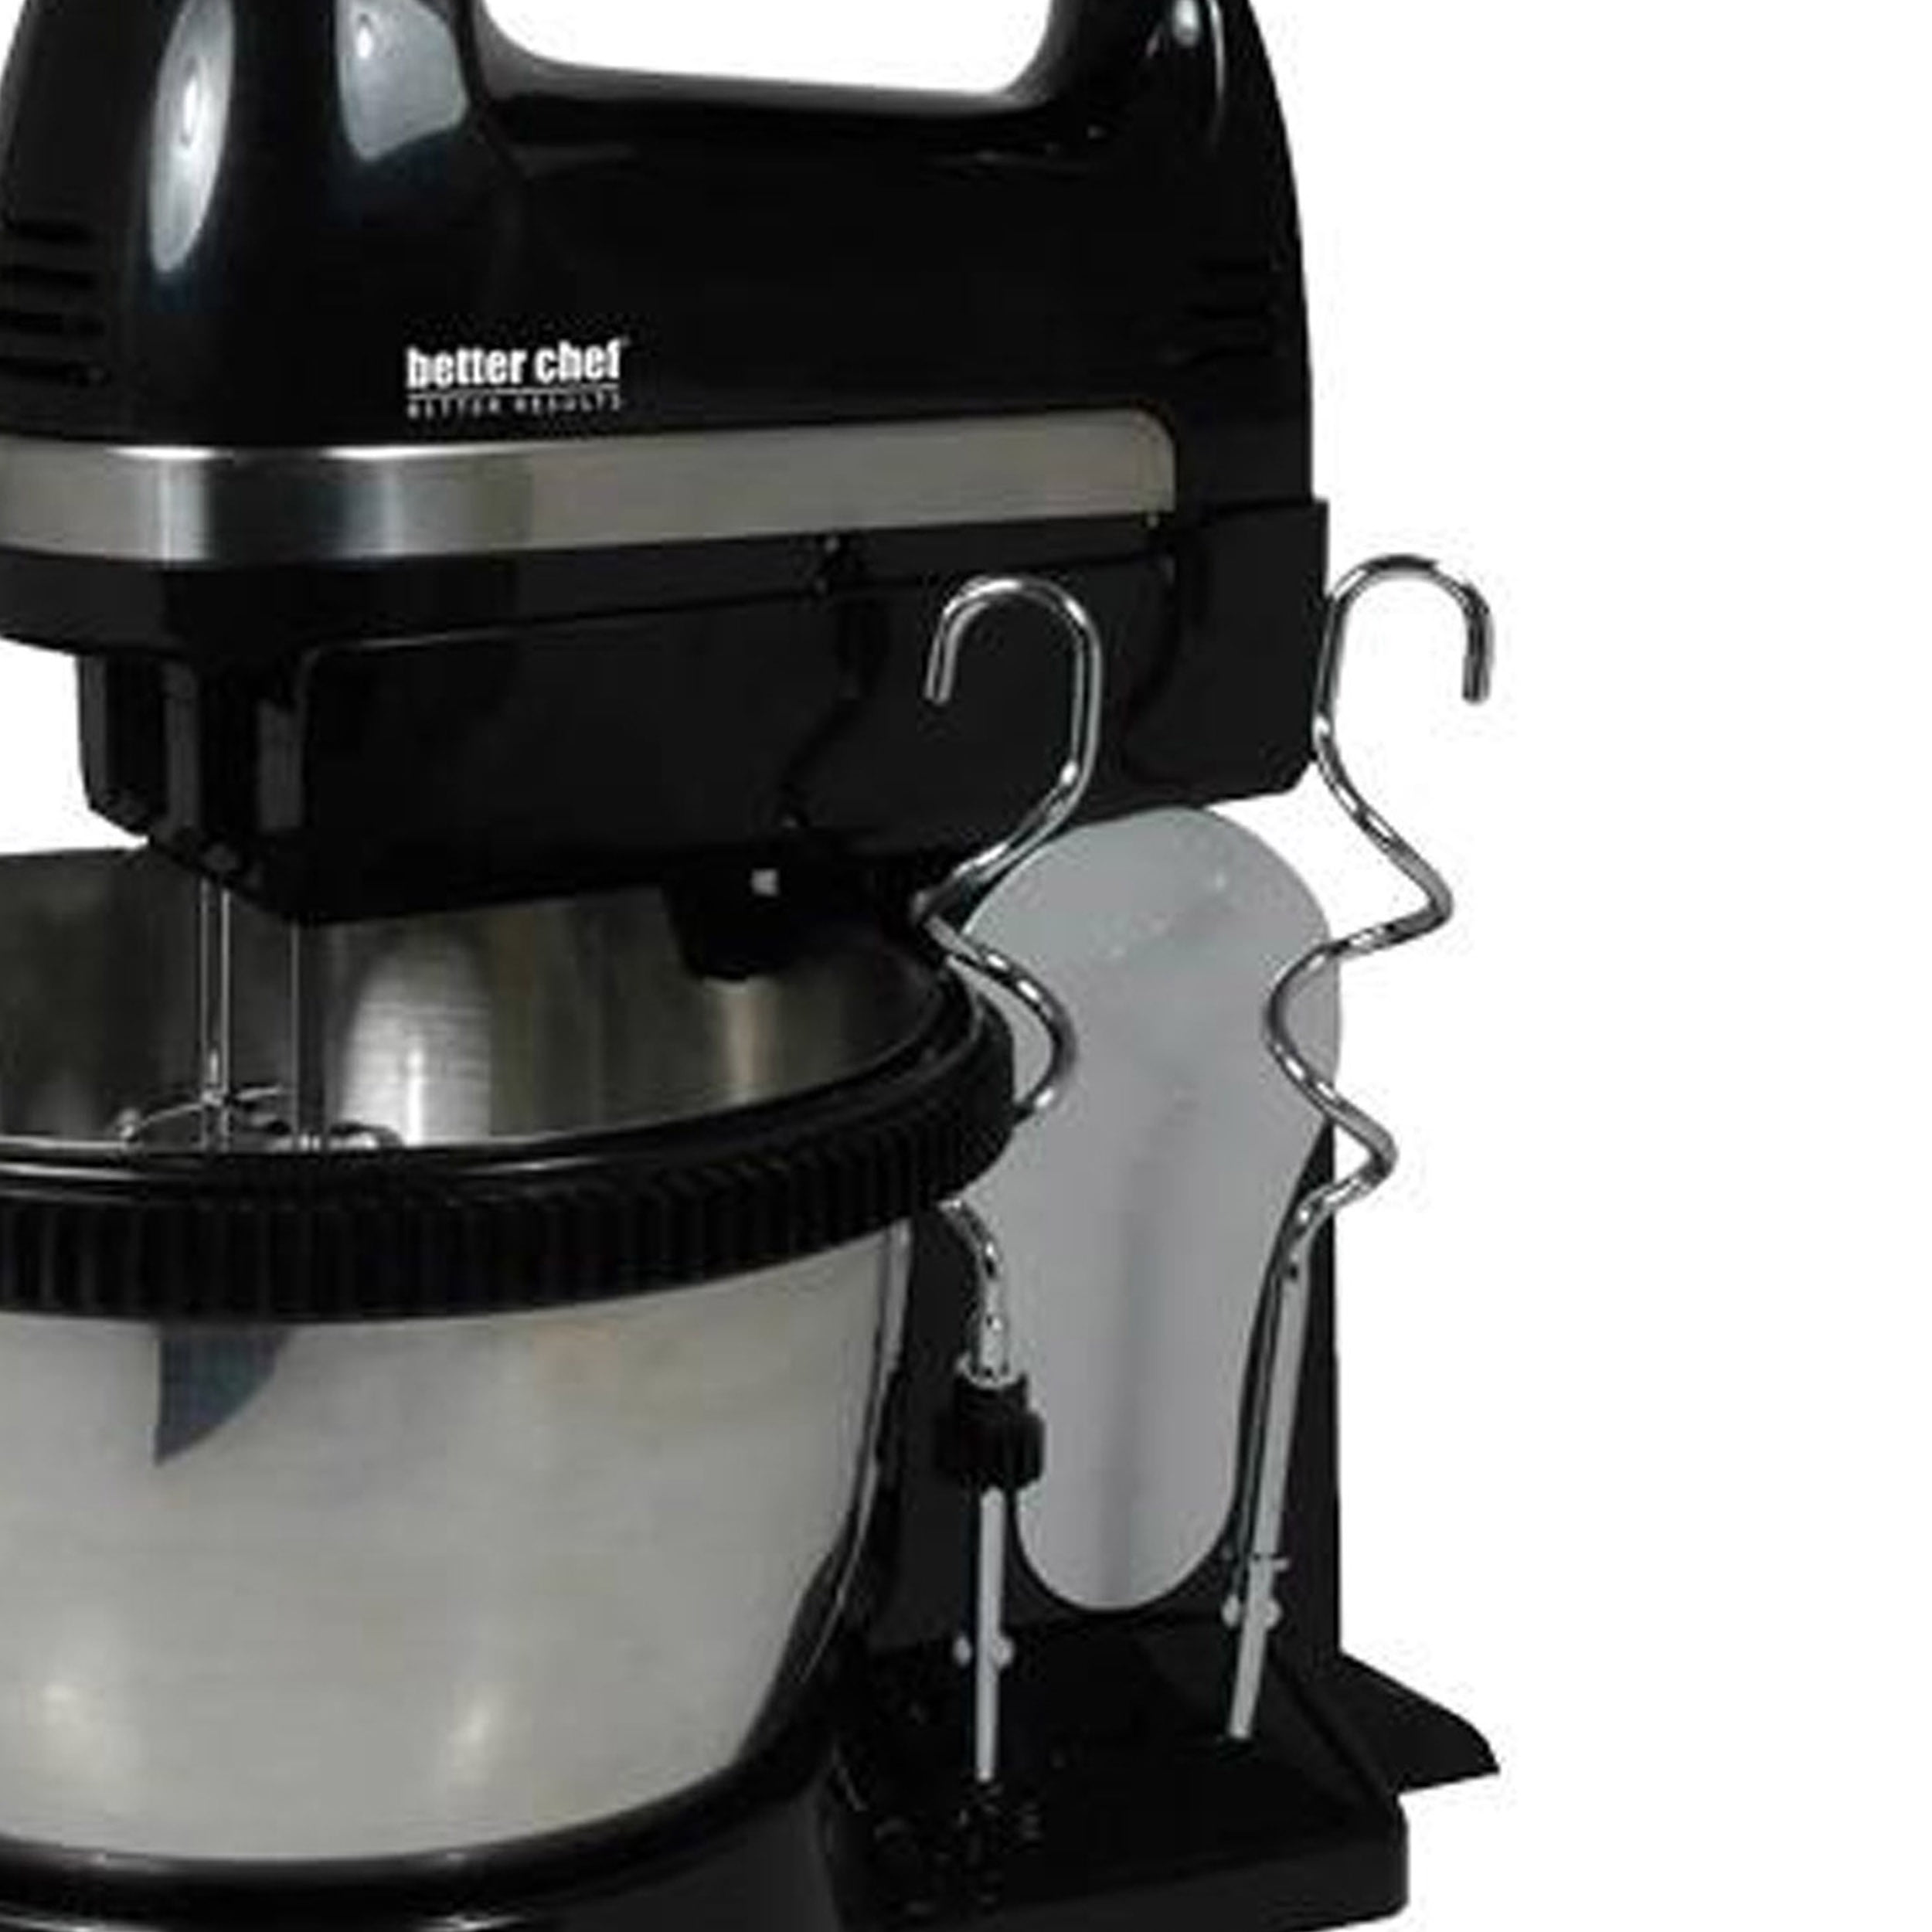 Better Chef 5-Speed 150-Watt Black Hand Mixer with Silver Accents